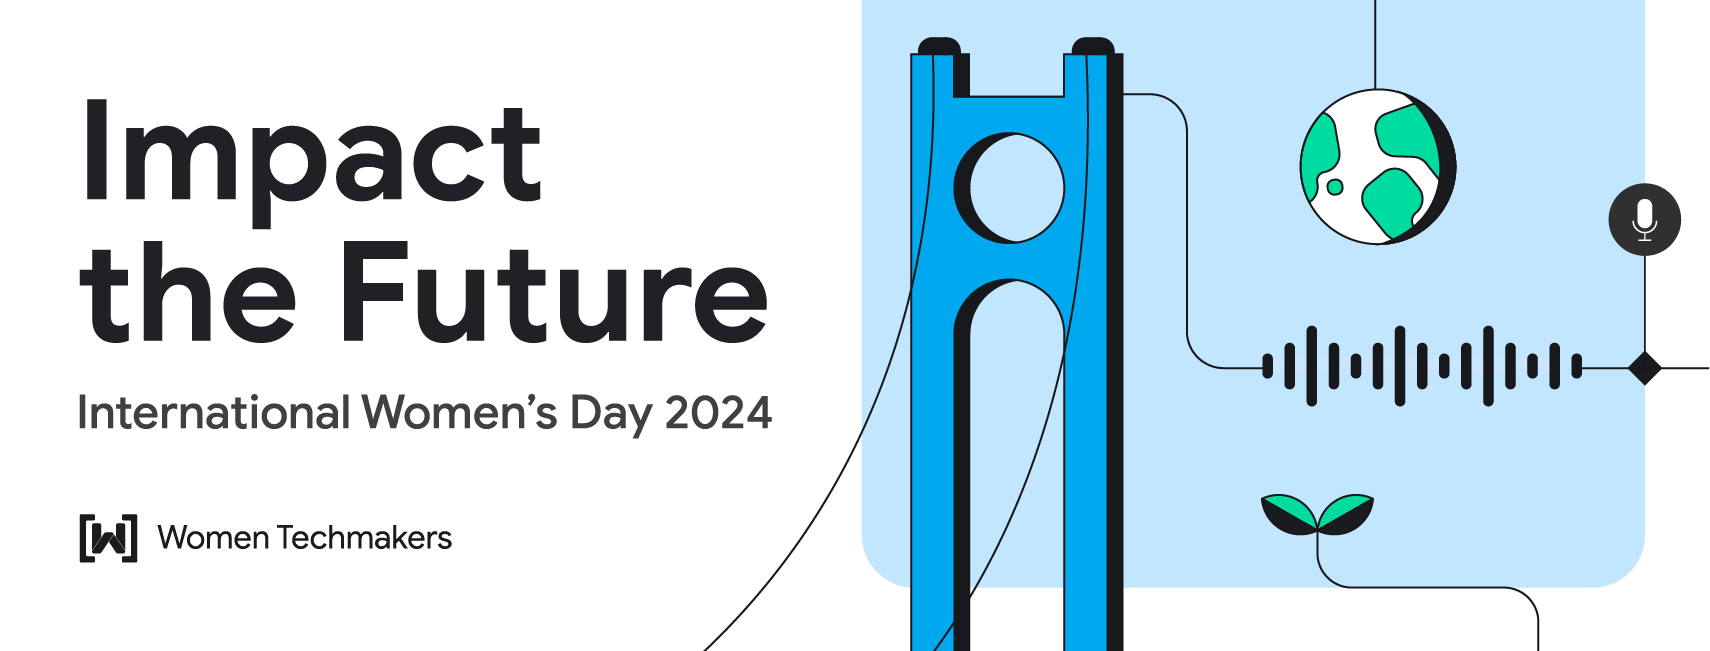 A vibrant International Women's Day banner proclaims 'Impact the future' above the date and WTM logo. A colorful illustration on the right symbolizes connection through diverse objects.